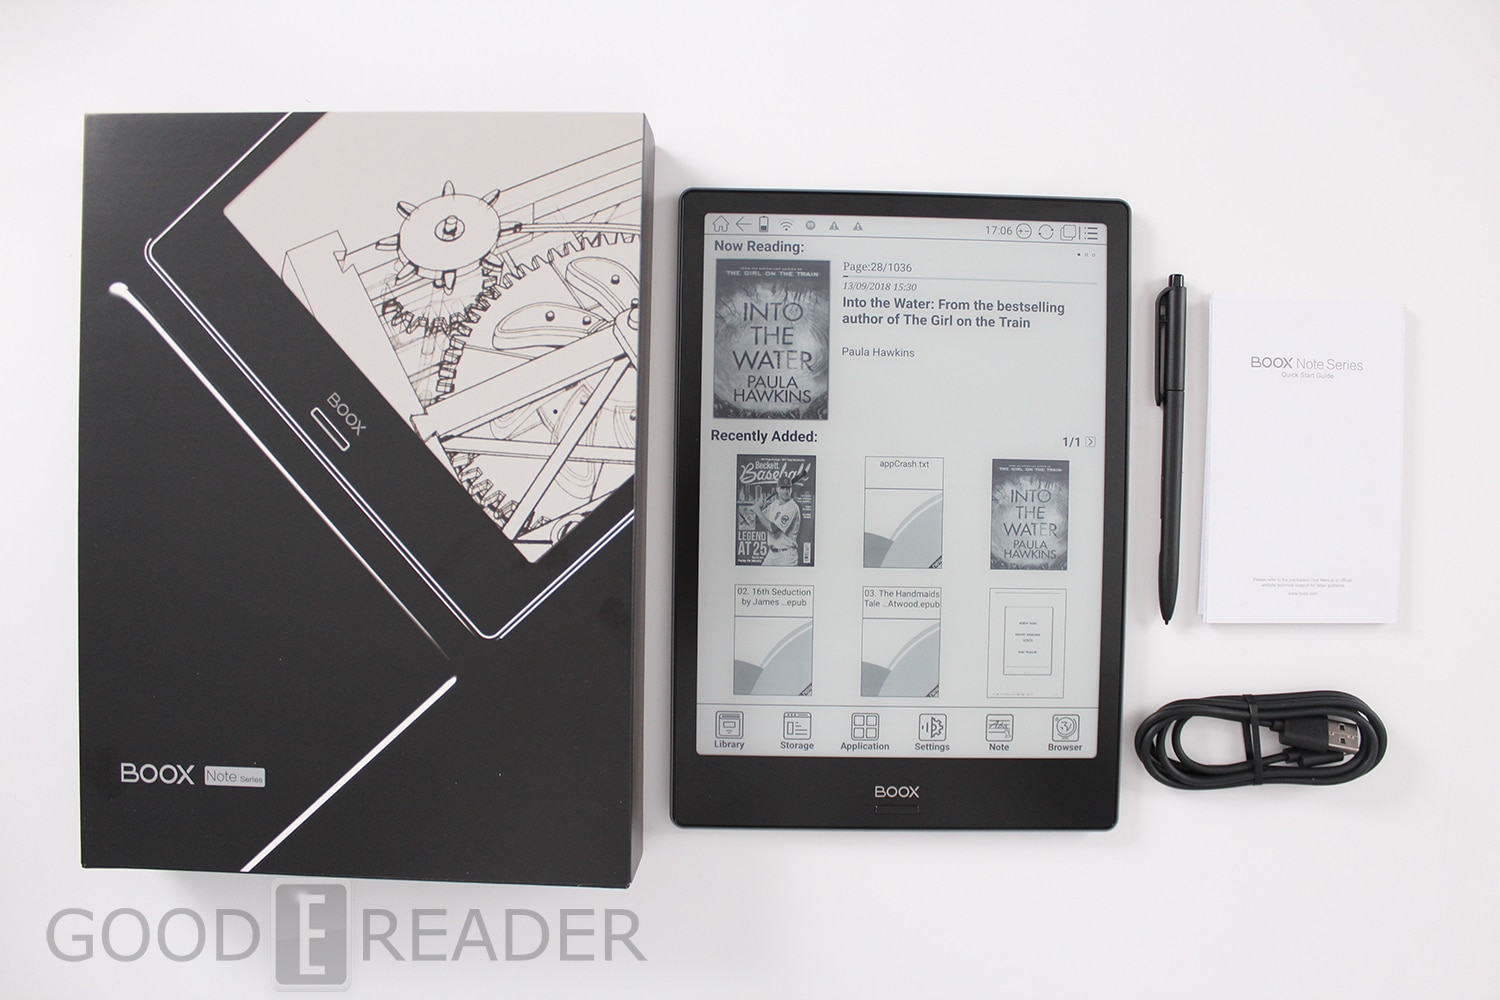 Onyx Boox Note 10.3 eReader Goes Up for Pre-Order - Android 6.0, $551 -  The Digital Reader